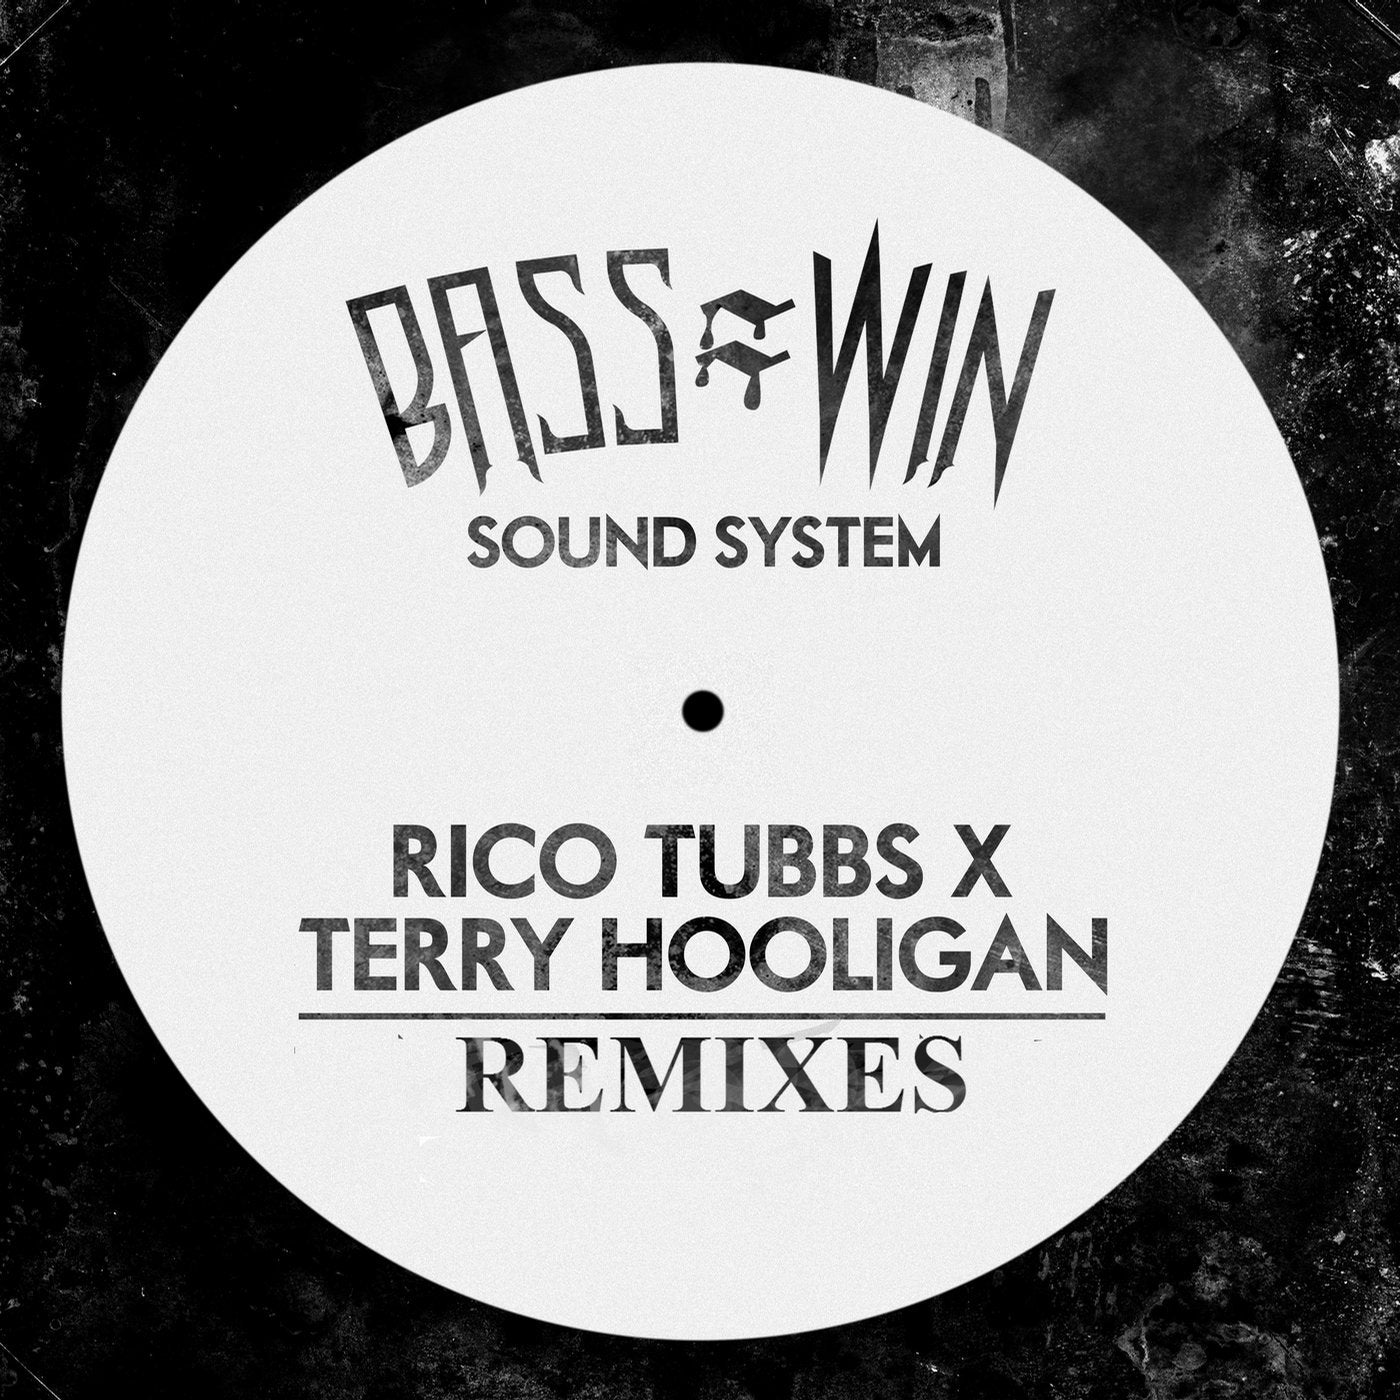 Bass=Win Sound System: One and Only Remixes